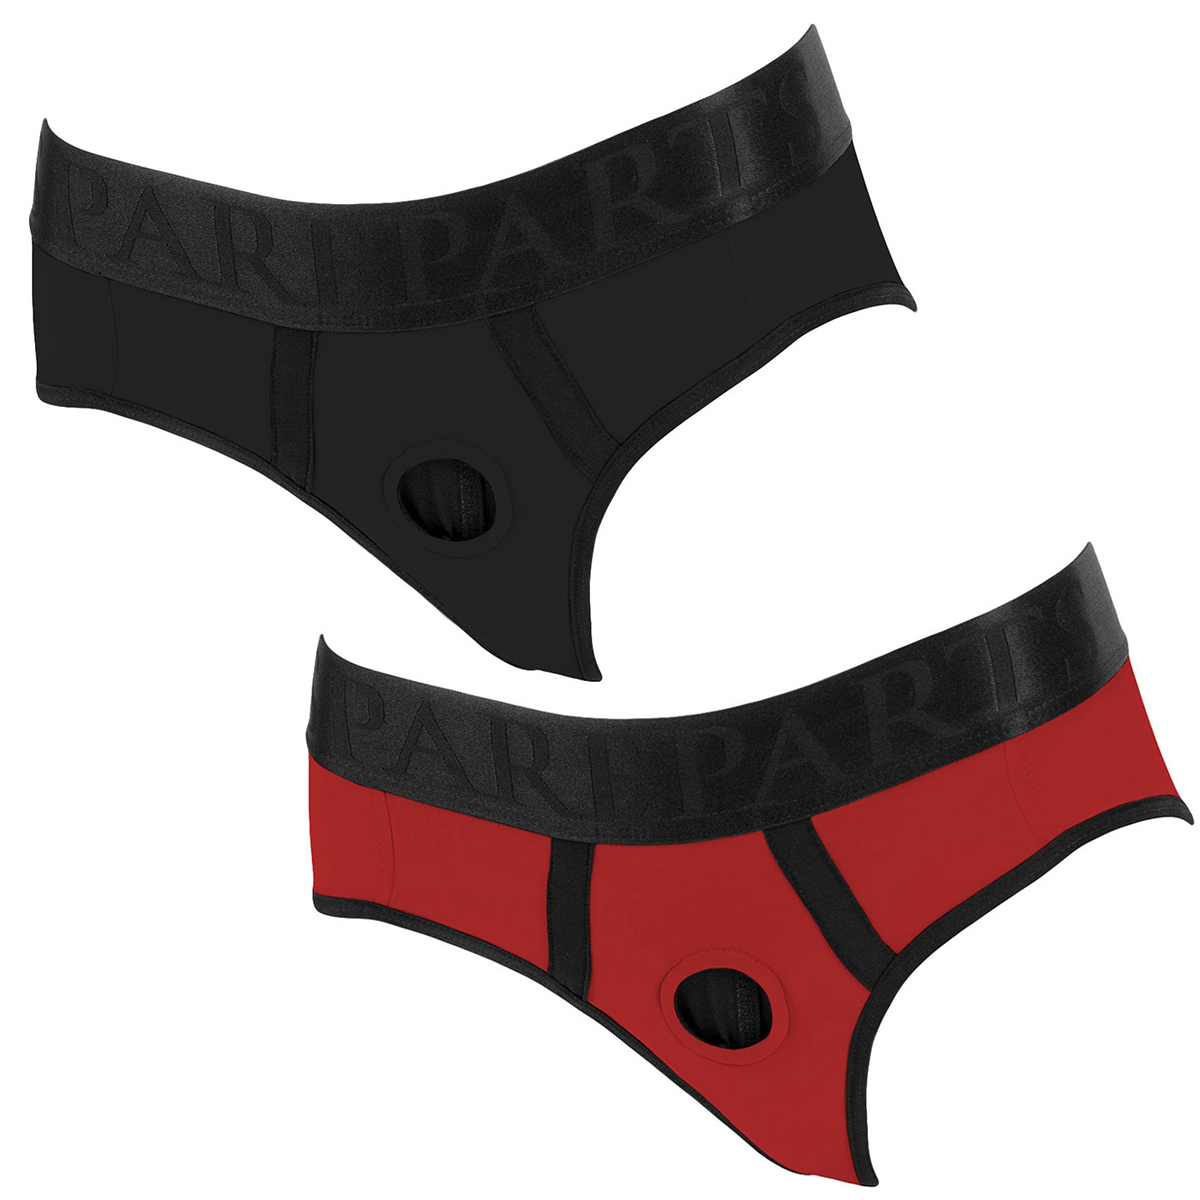 Tomboi Brief Harness by Spareparts